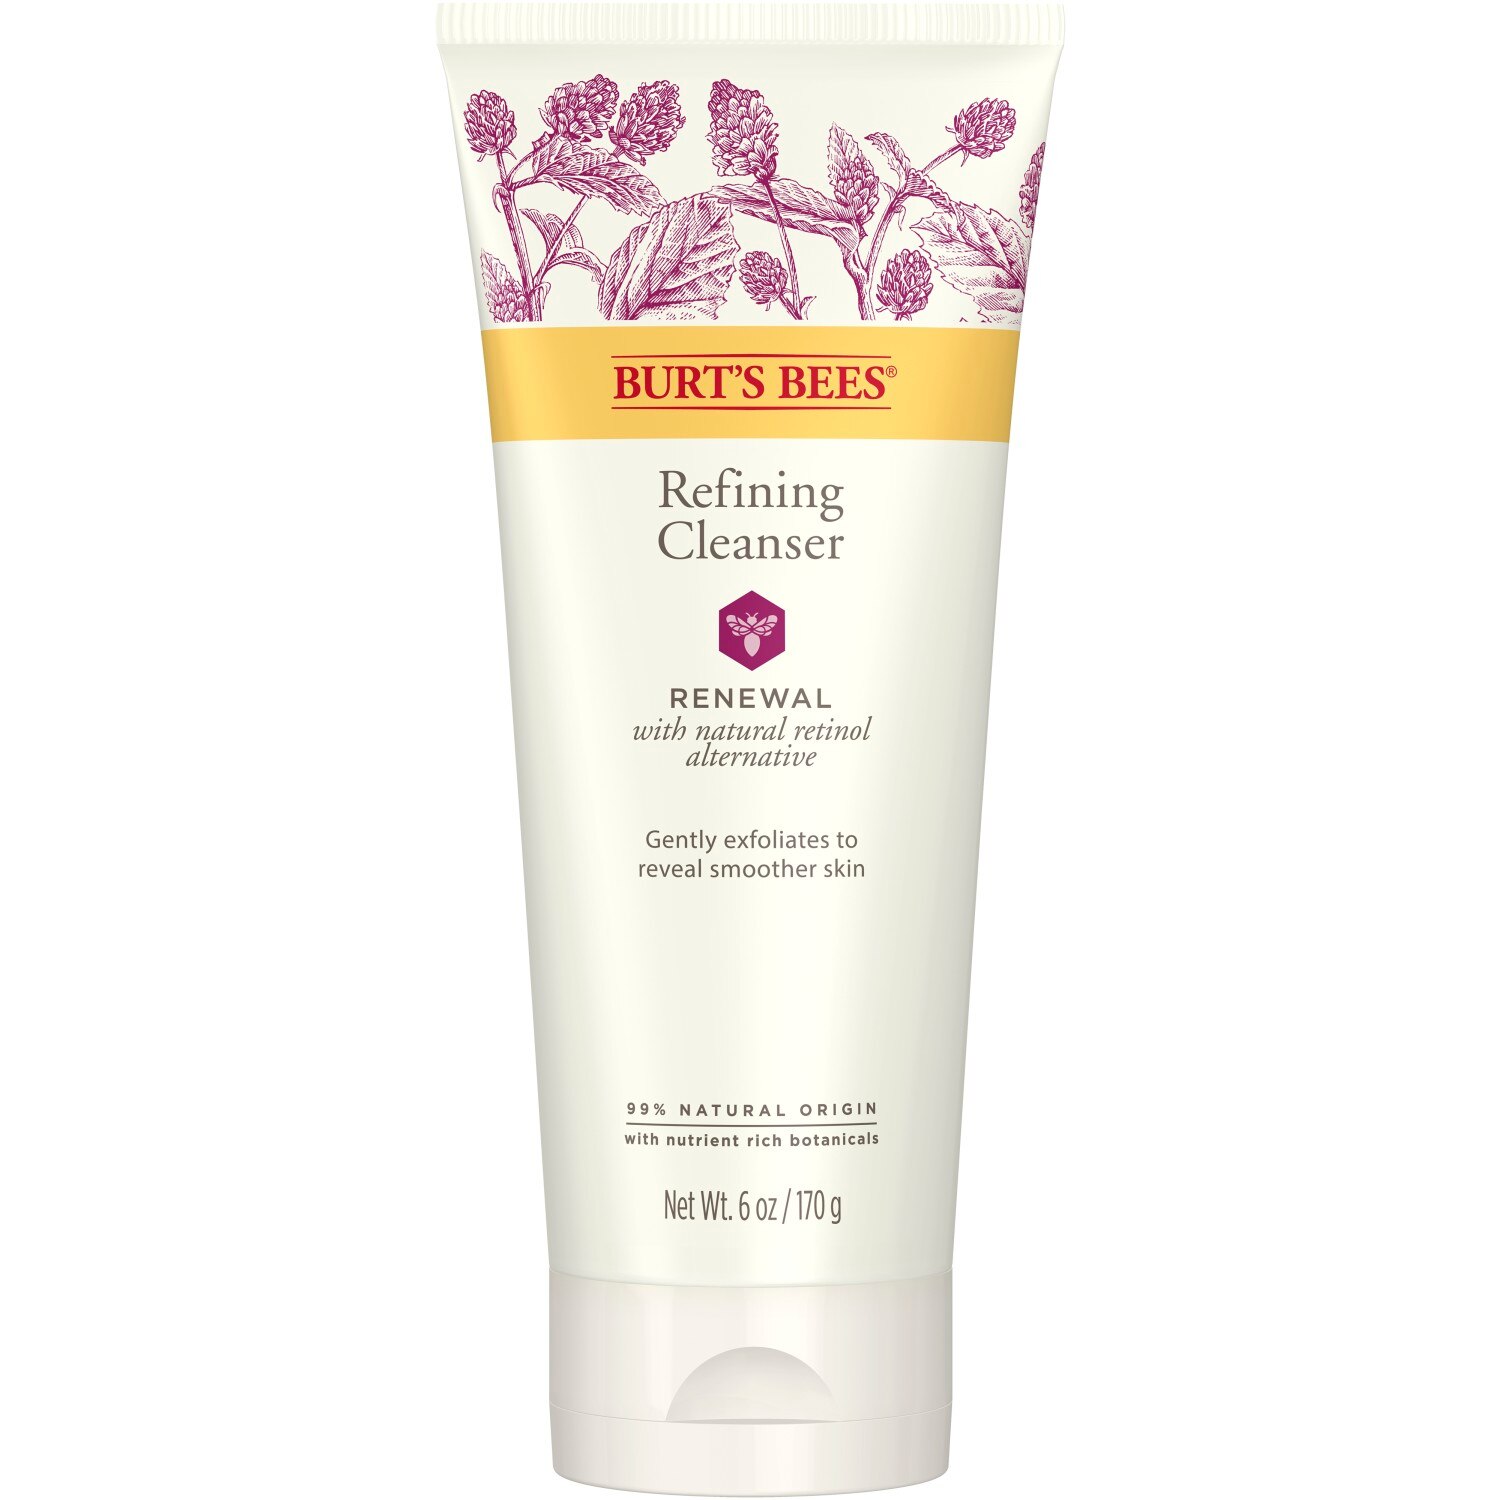 Burt's Bees Renewal Refining Cleanser, Firming Face Wash, 6 OZ